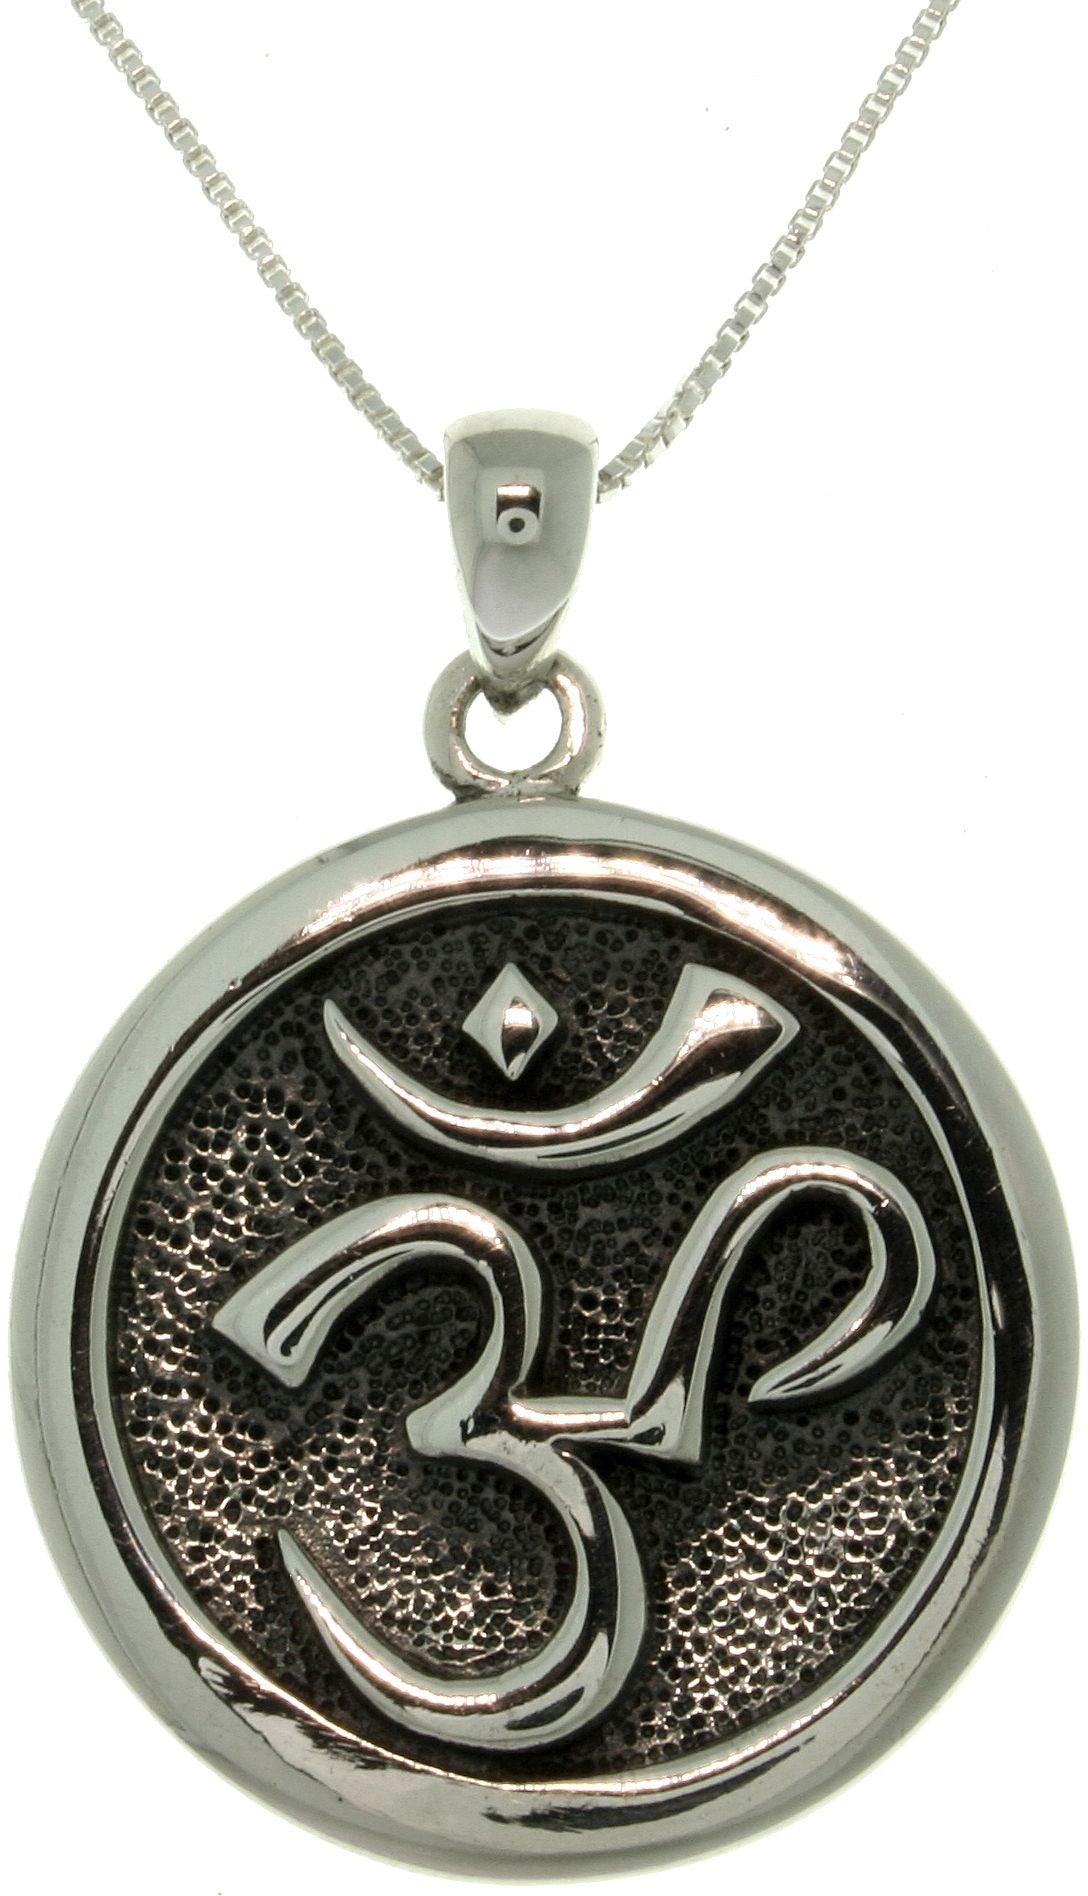 Jewelry Trends Sterling Silver Om Hindu Meditation Symbol Pendant on Box Chain Necklace